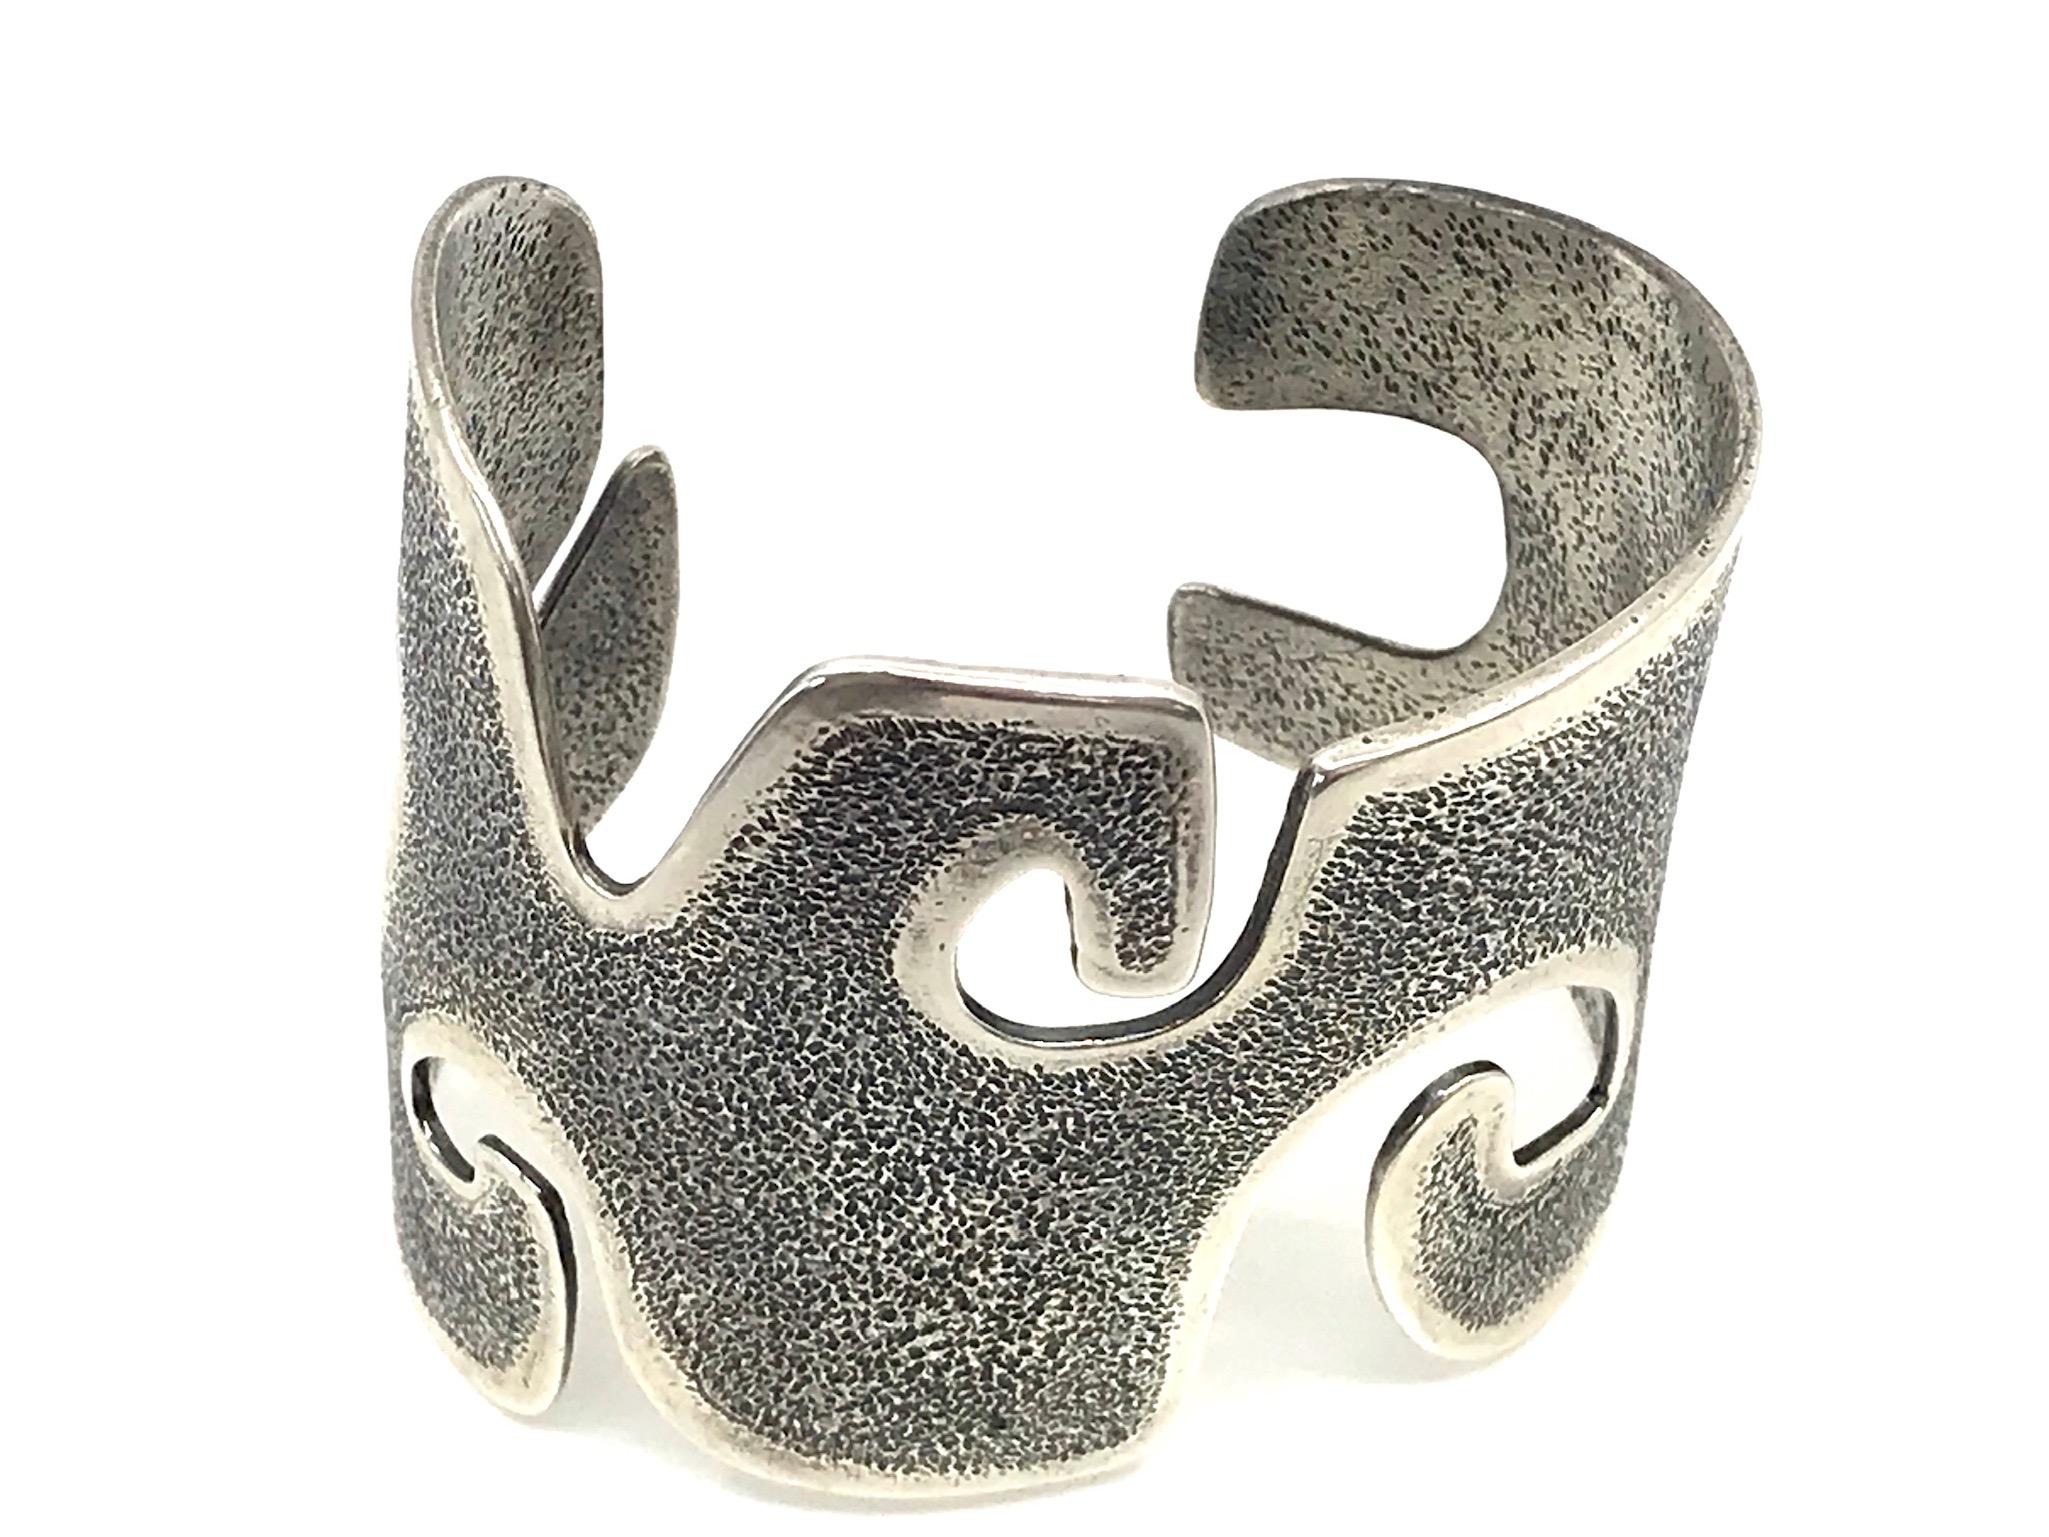 Grandmother, Melanie Yazzie contemporary cast silver wide cuff bracelet  Navajo 
This is part of a series of imagery Melanie Yazzie uses in her printmaking, sculptures and jewelry designs. The jewelry designs for Grandmother include this pendant